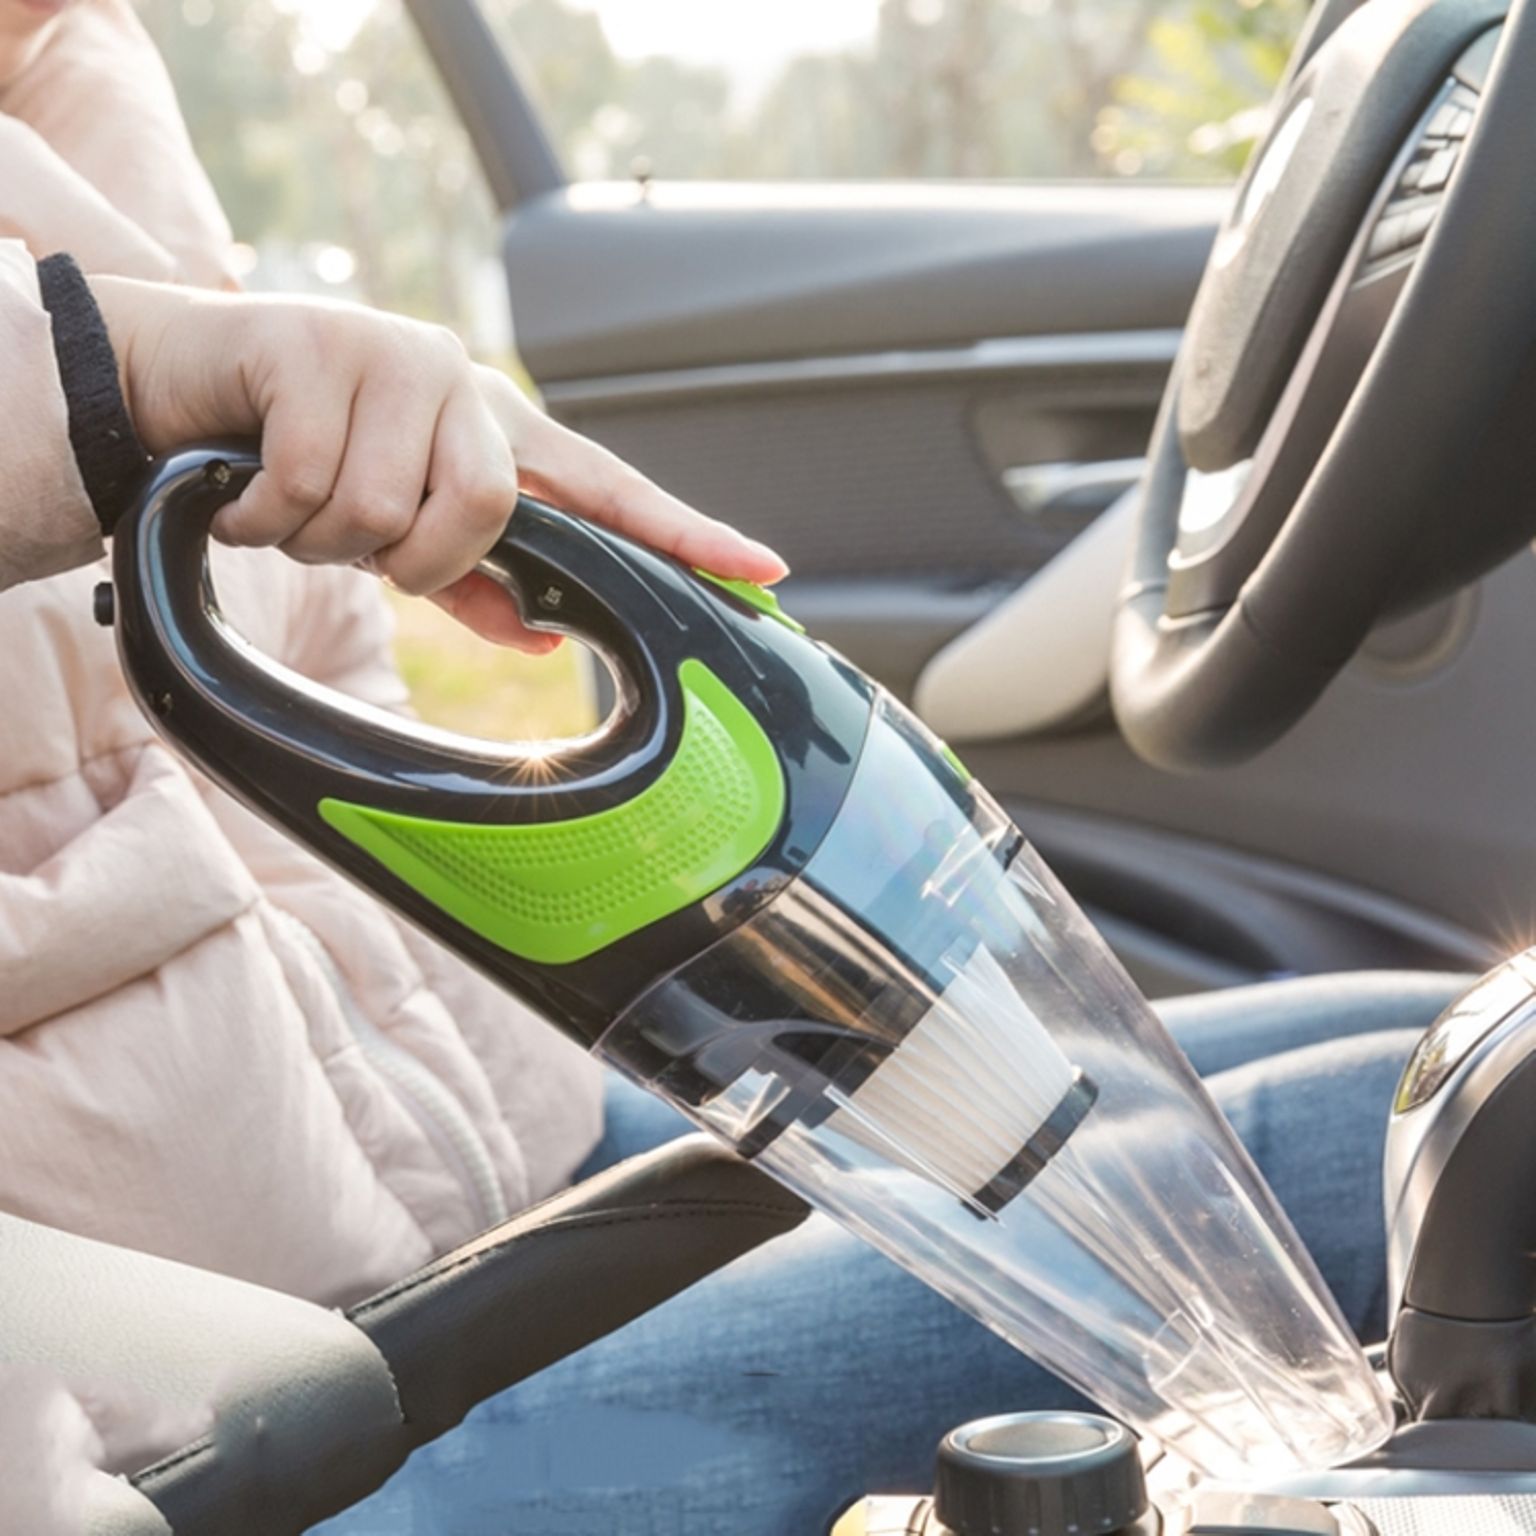 Portable Vacuum Cleaner Best equipment for your car – What should you get?